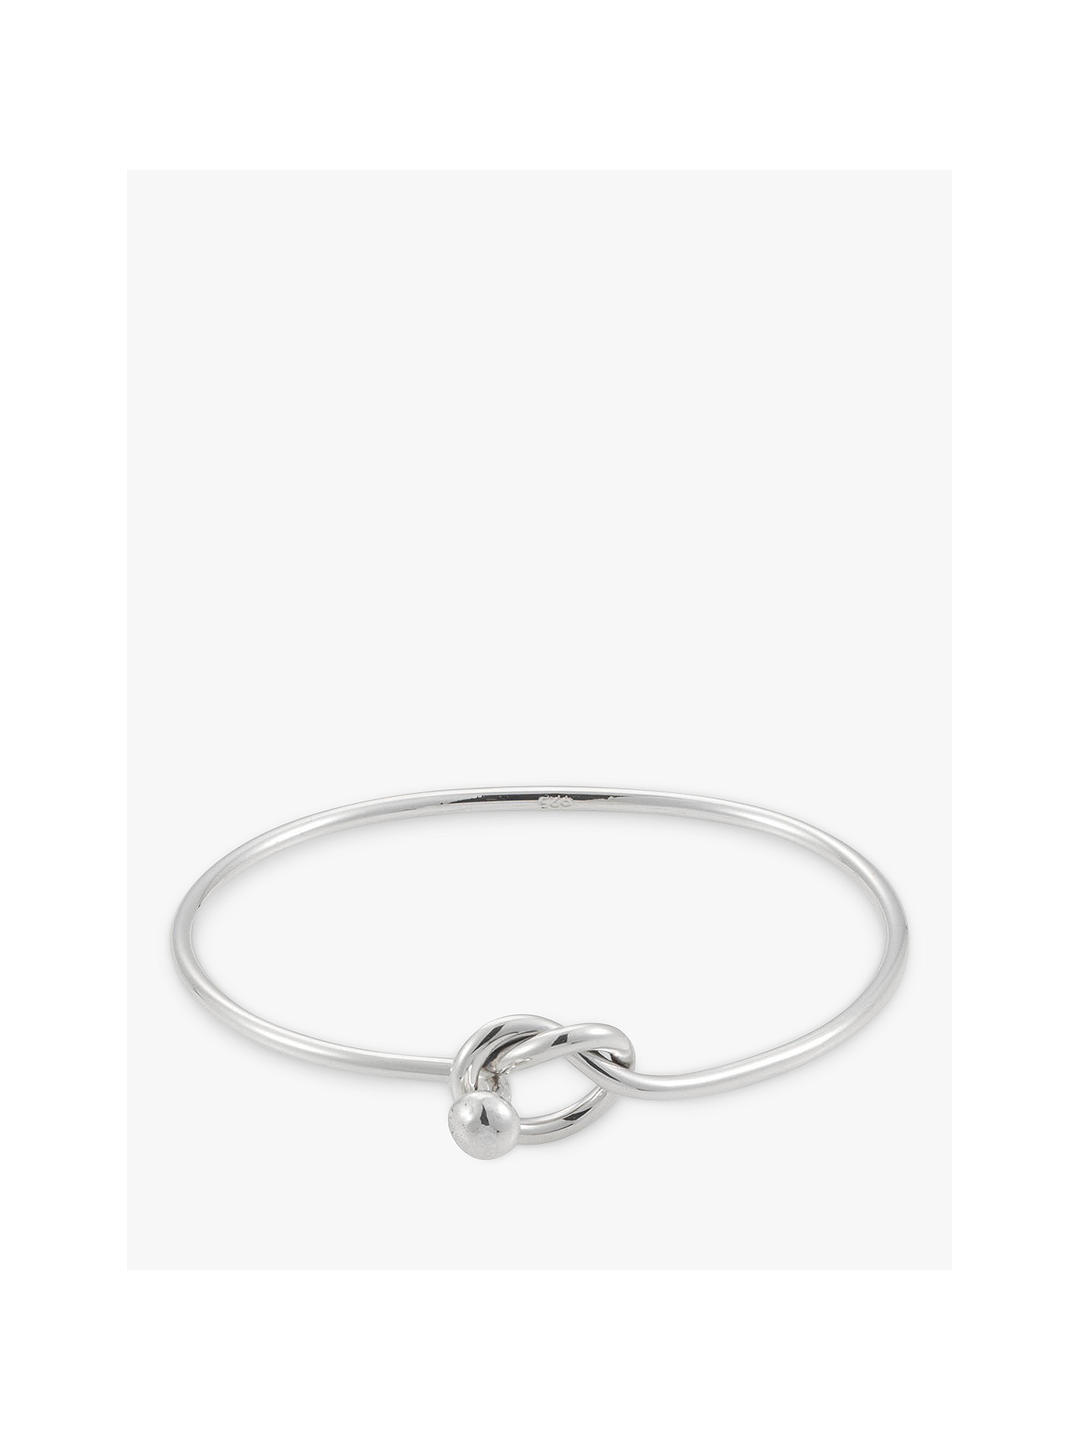 Andea Lovers Knot Silver Bangle